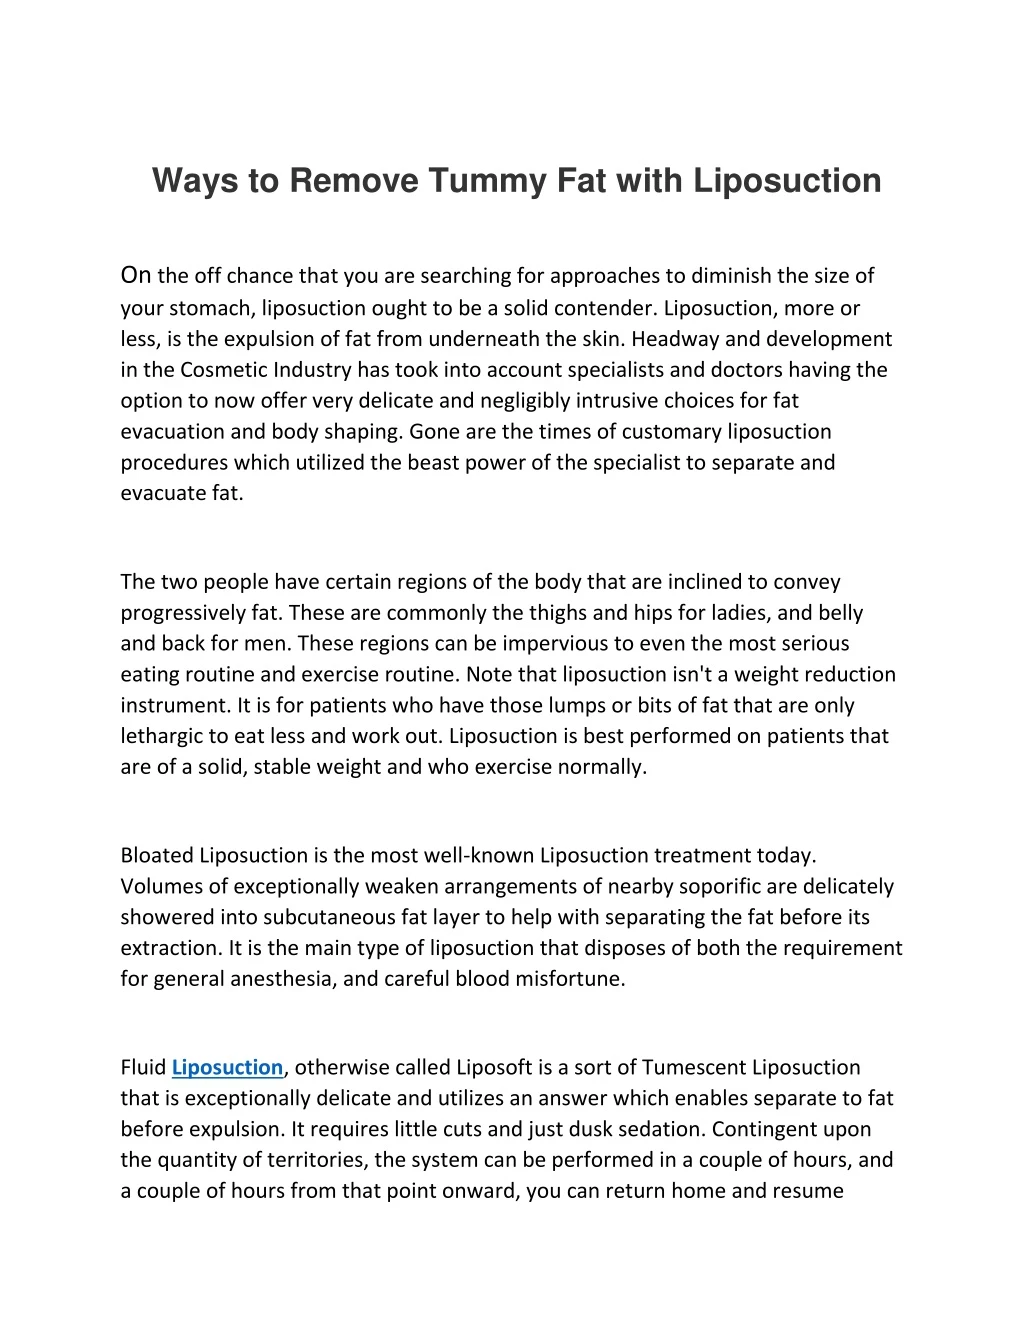 ways to remove tummy fat with liposuction